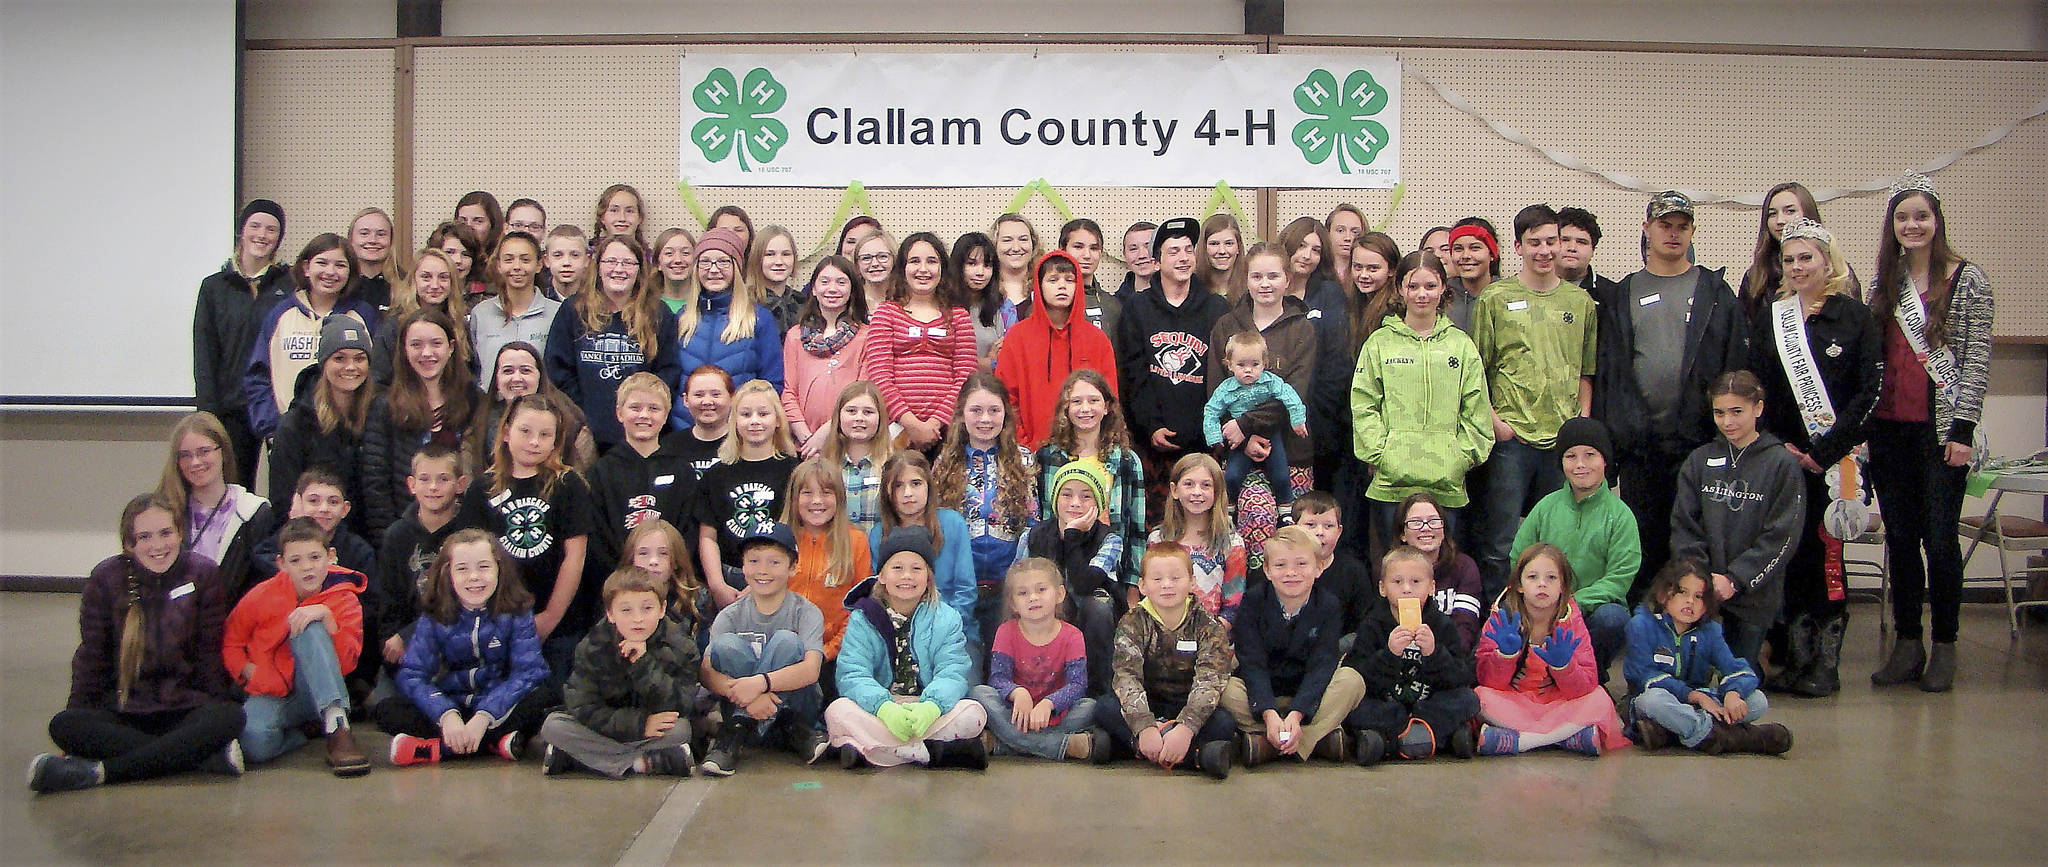 Milestone: Clallam County 4-H gives kudos on Achievement Day